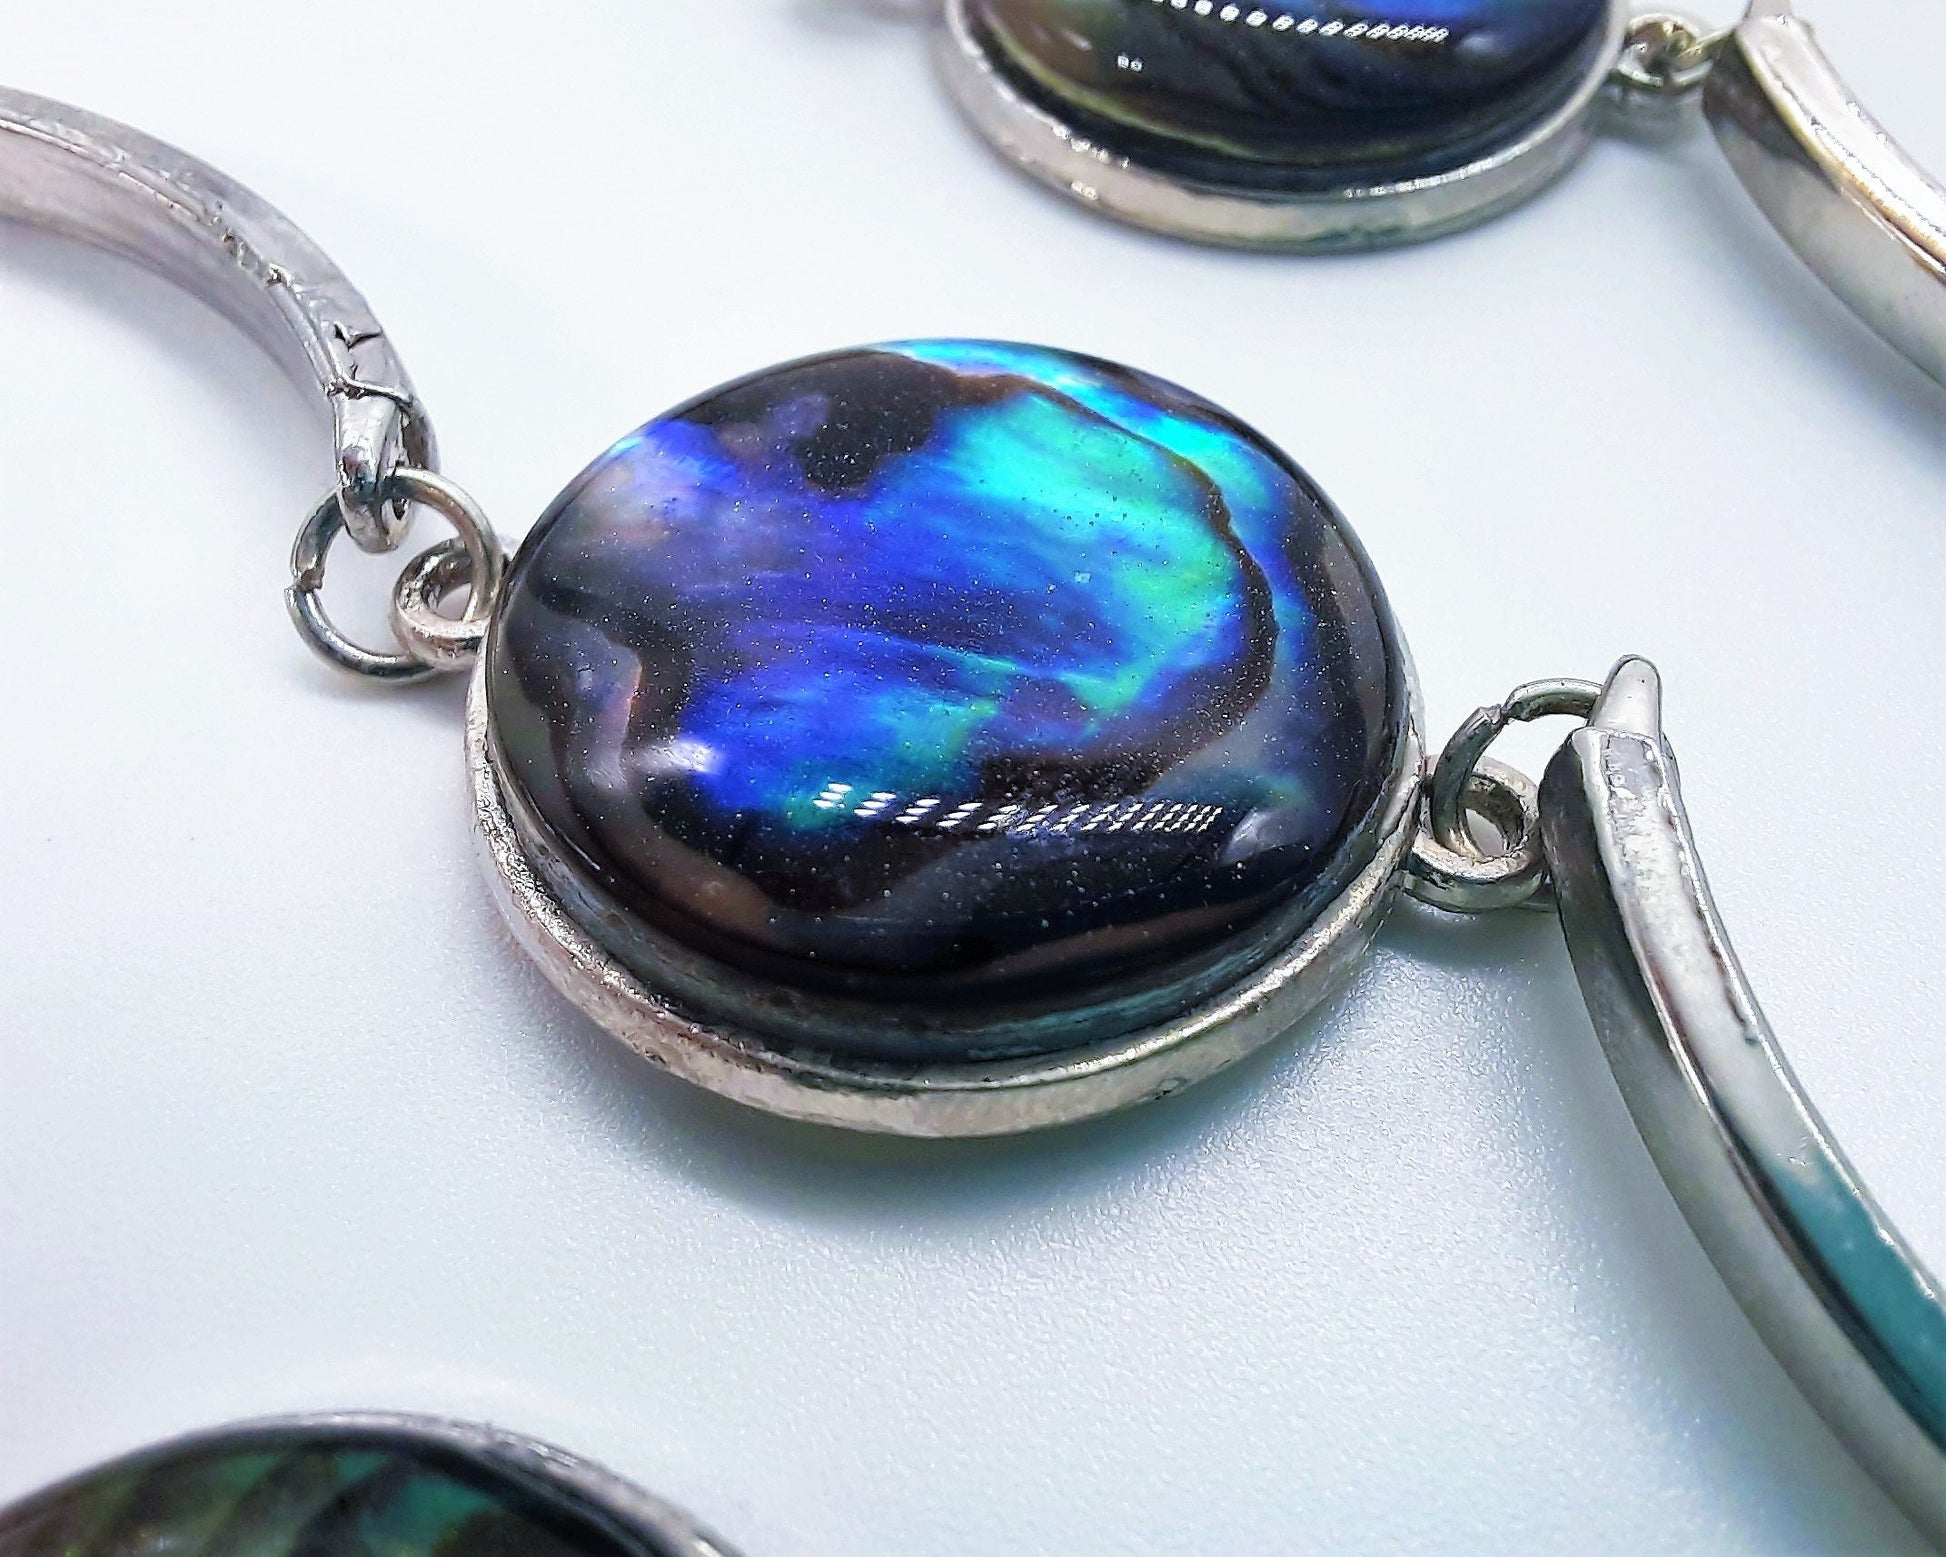 Abalone Seashell Stainless Steel Adjustable Bangle Bracelet Made with Holographic Powder Infused Resin - Hypoallergenic